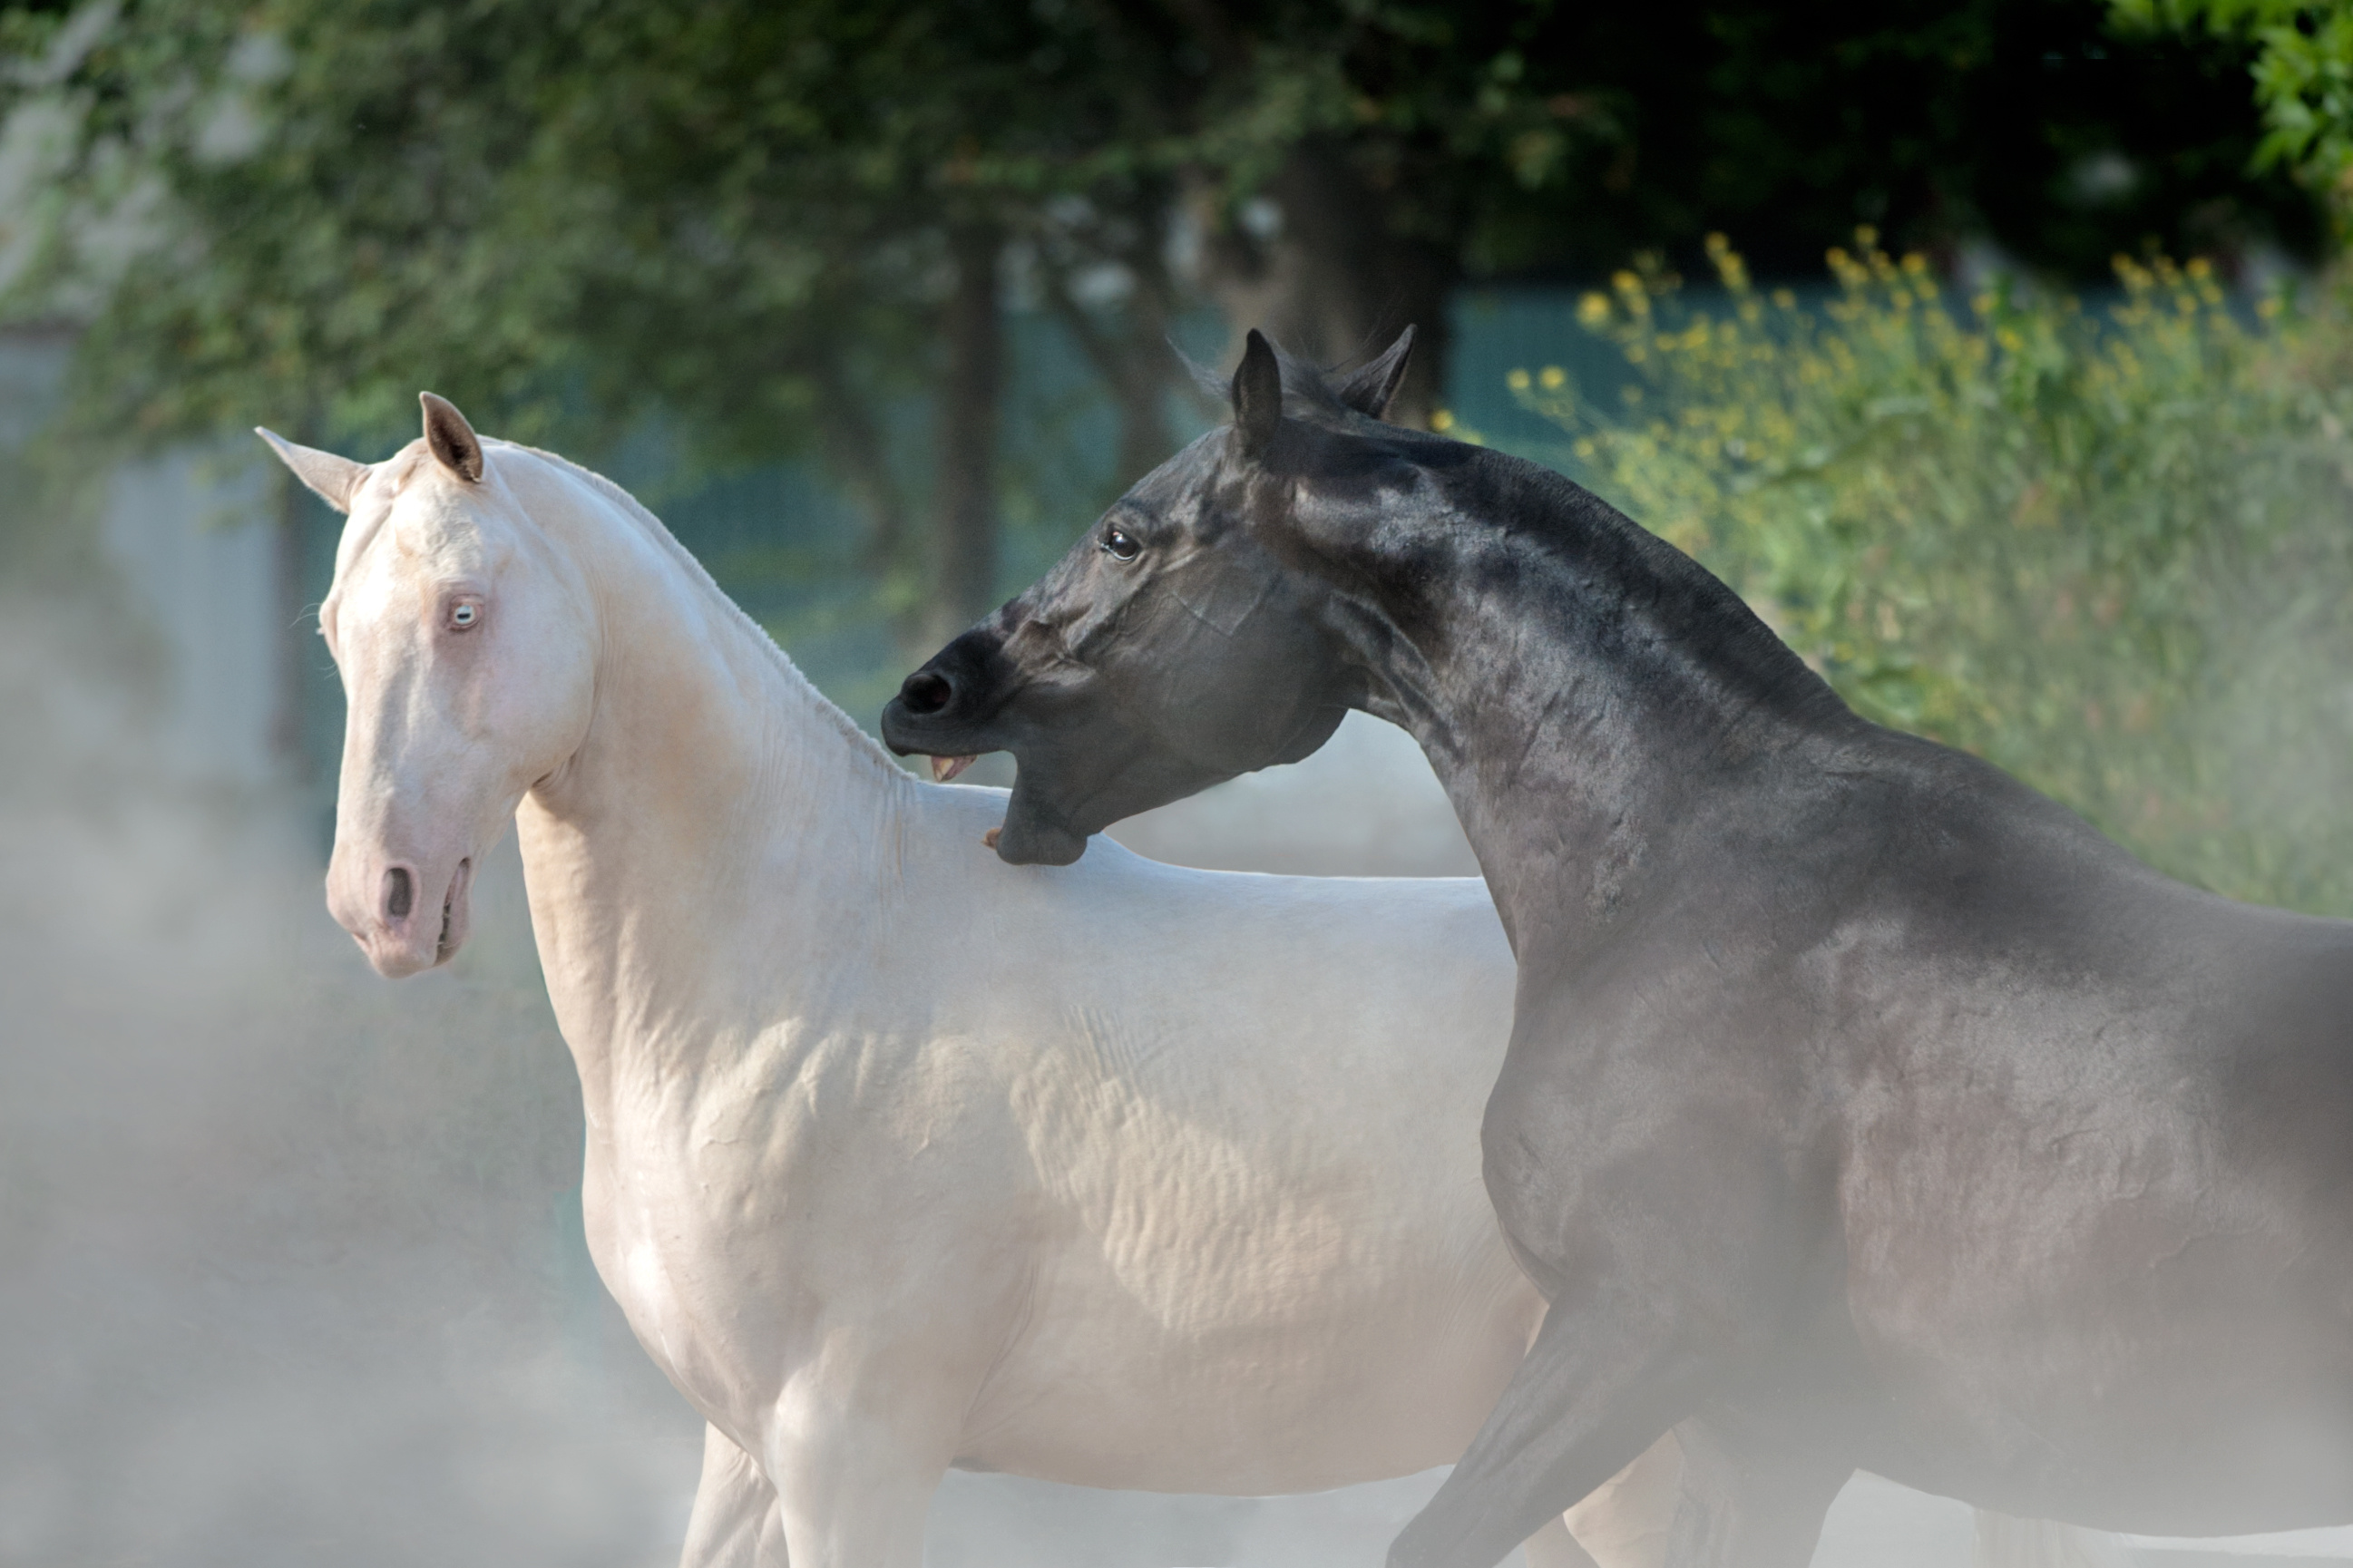 Two horses fighting, with a black one biting the neck of a white one. 